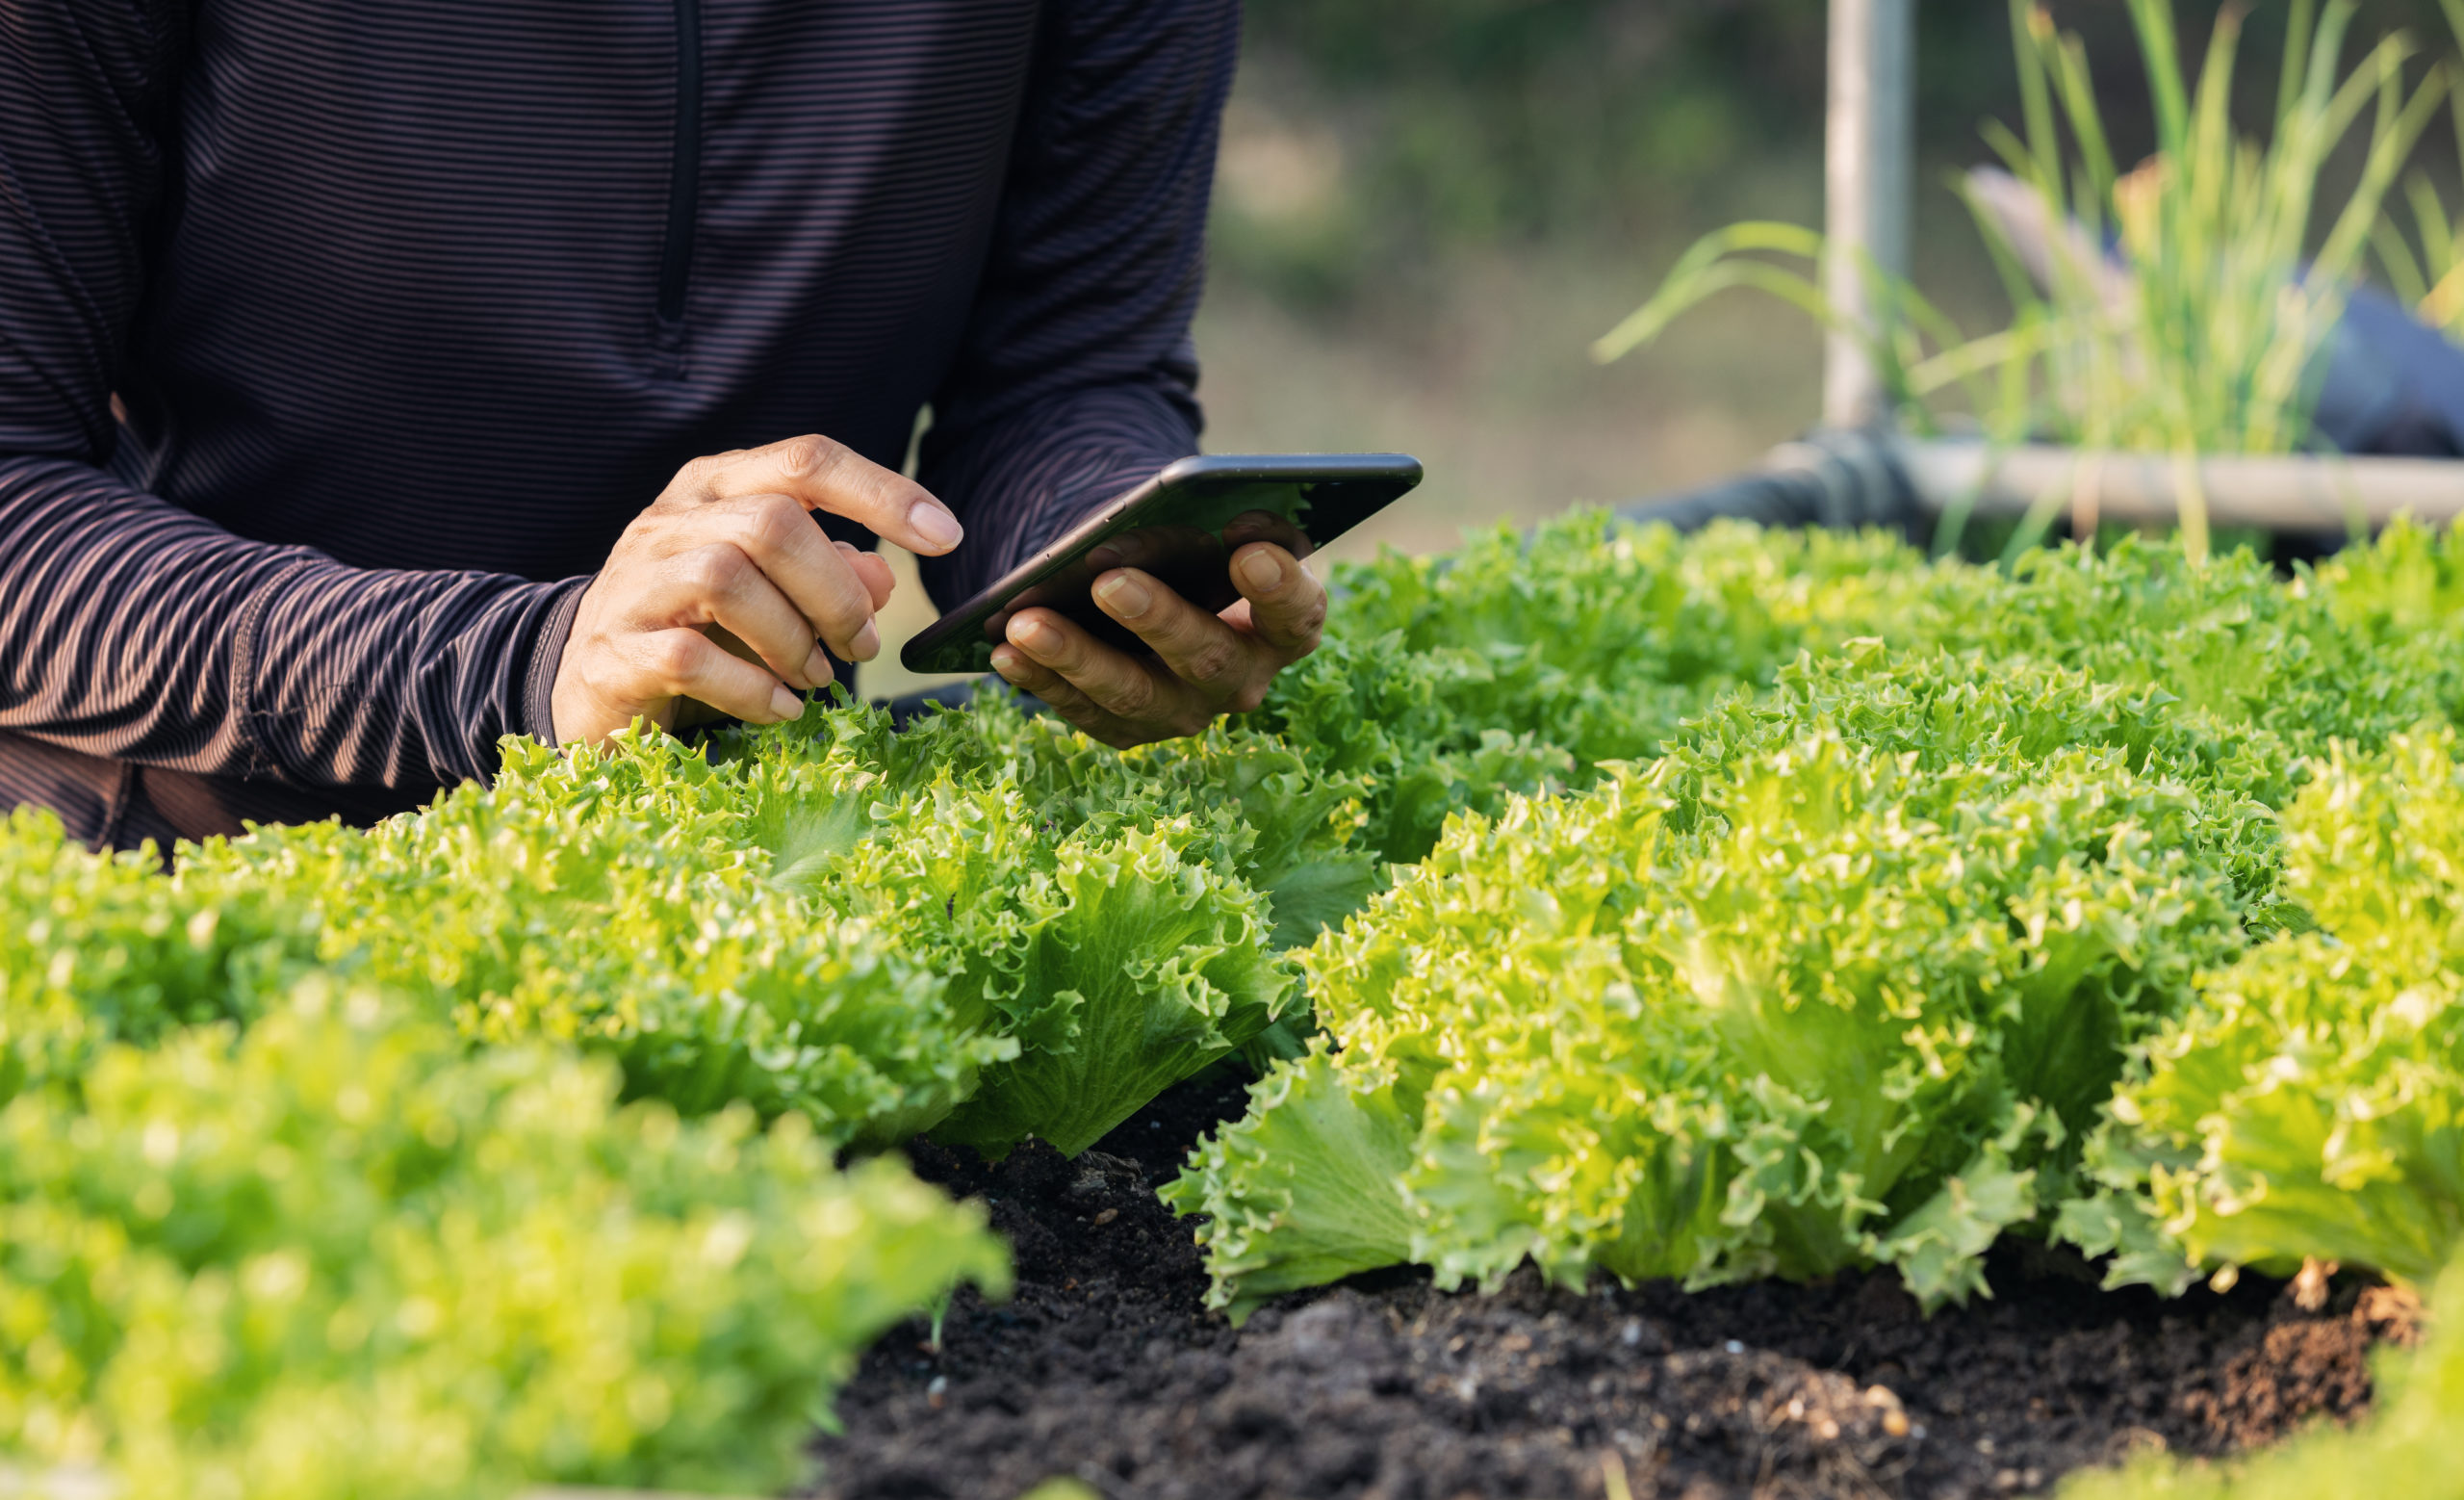 Smart farming using modern technologies in agriculture,Crop monitoring